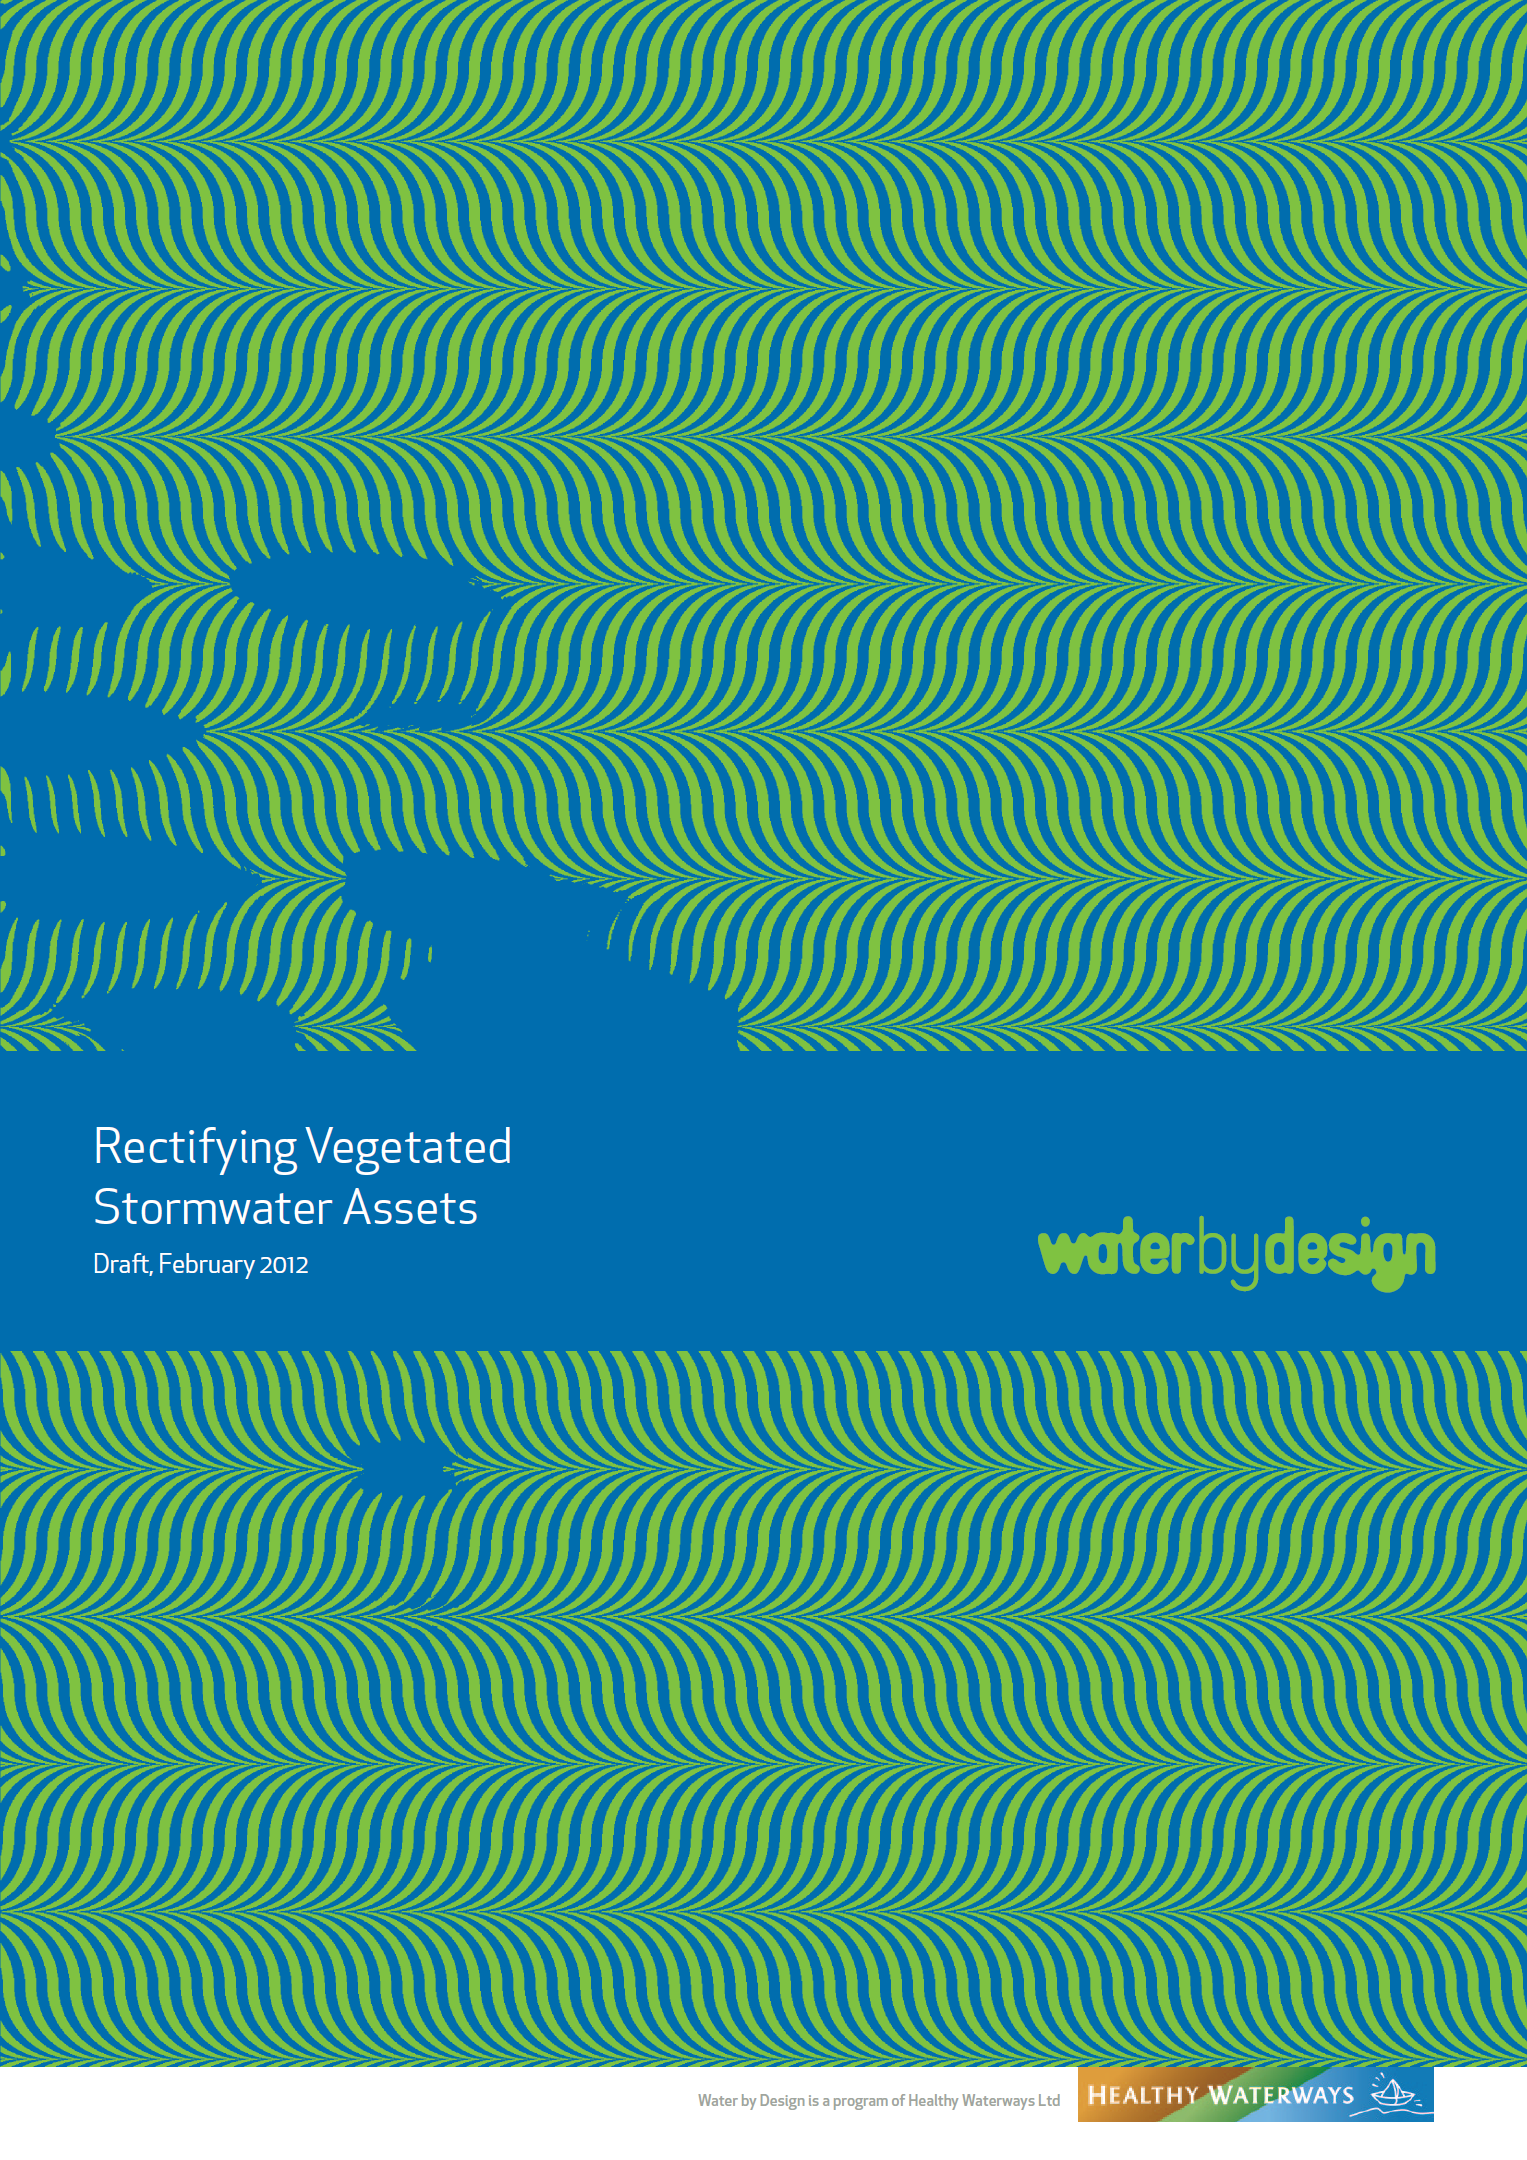 Rectifying Vegetated Stormwater Assets (2012)